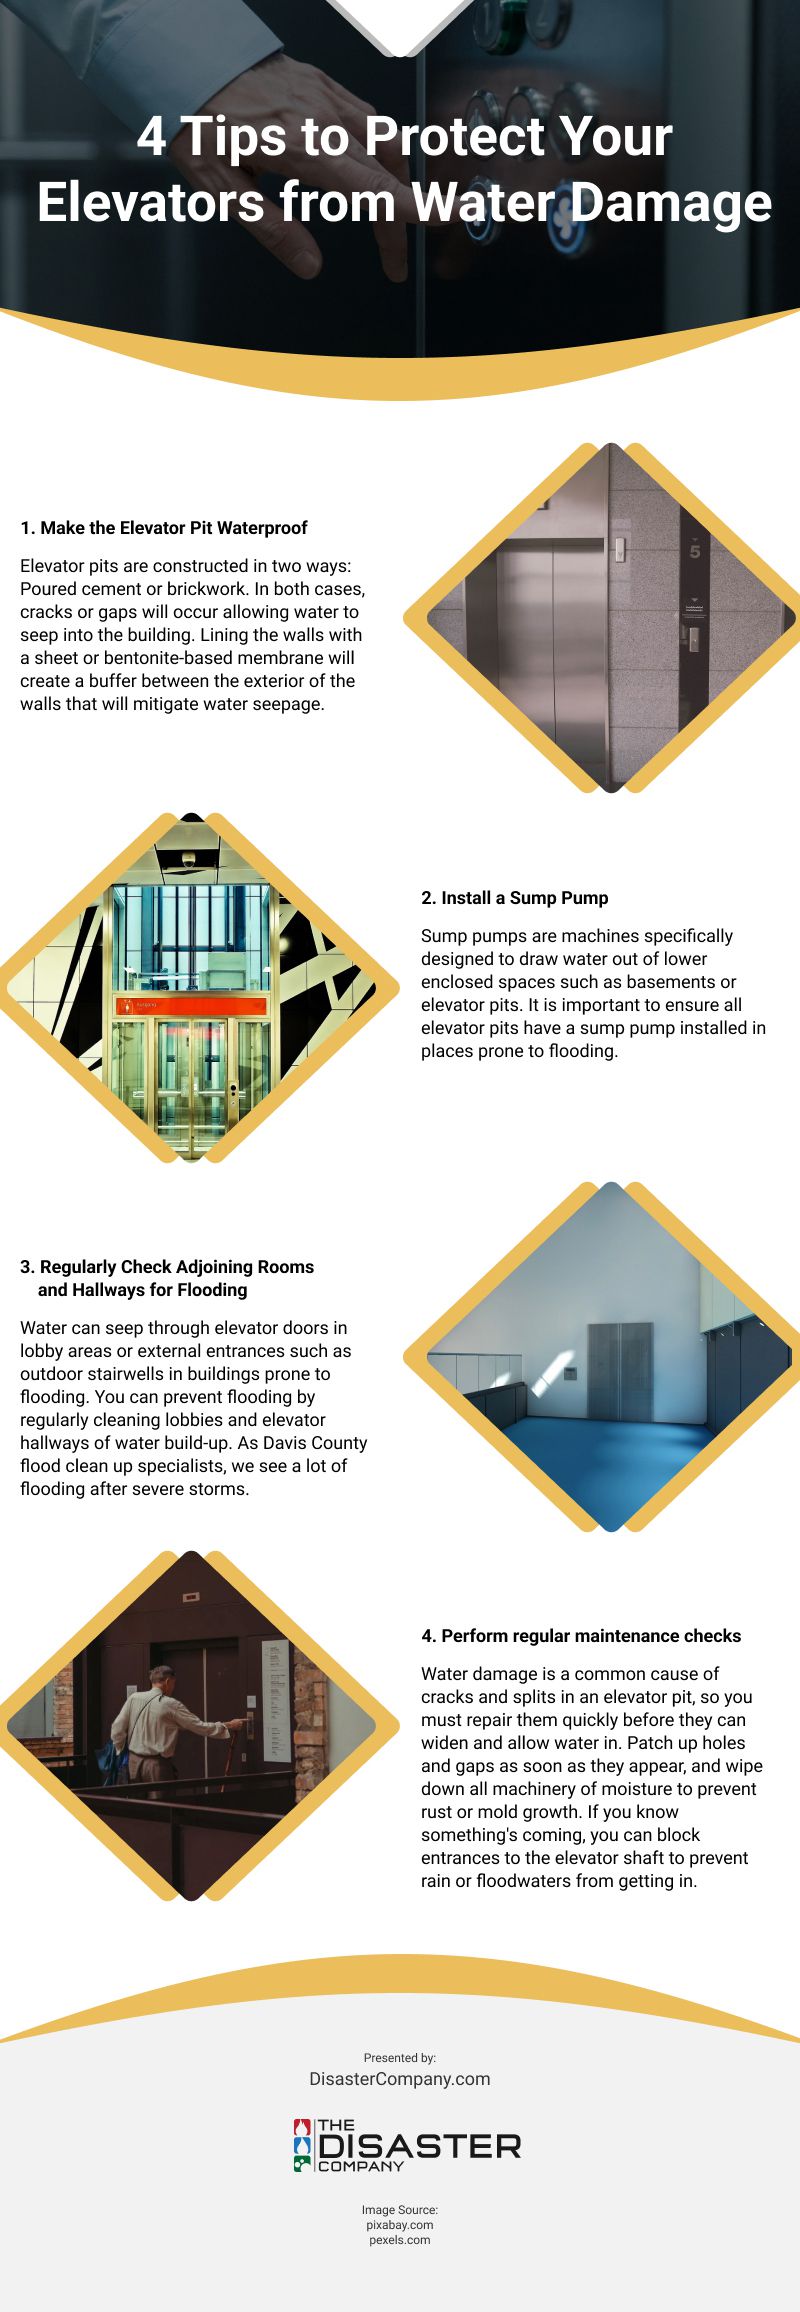 4 Tips to Protect Your Elevators from Water Damage Infographic